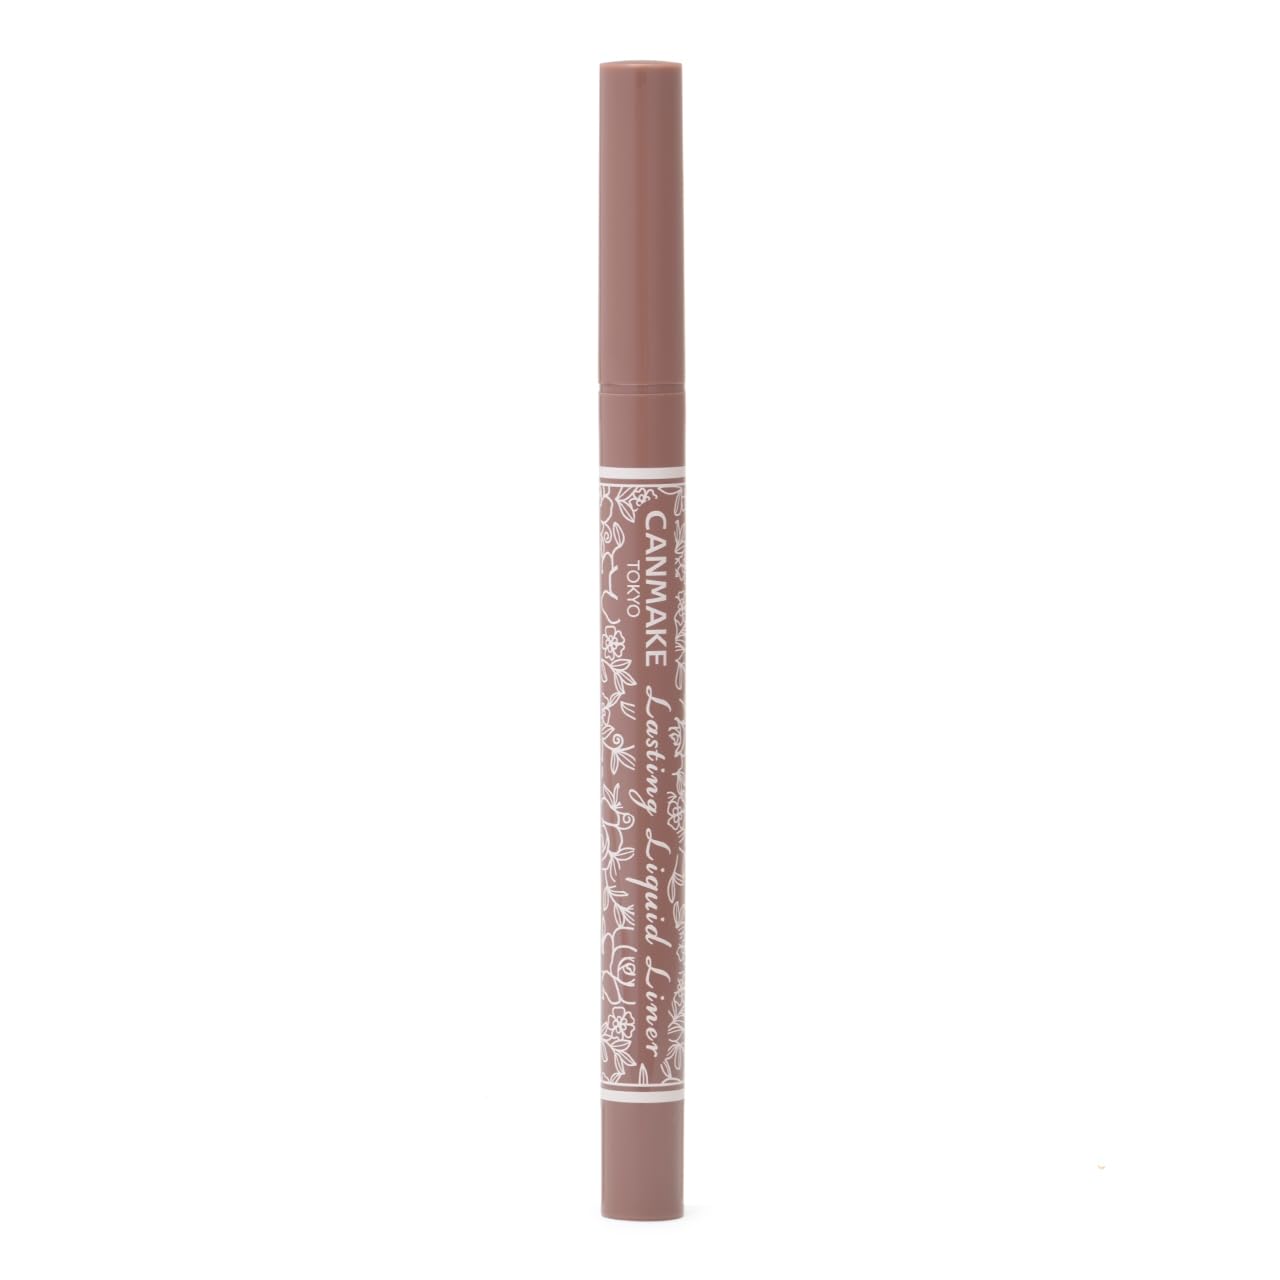 Canmake Lasting Liquid Eyeliner 08 Brown Maronge 0.5ml Quick Dry Fineliner - Hot Water Removal